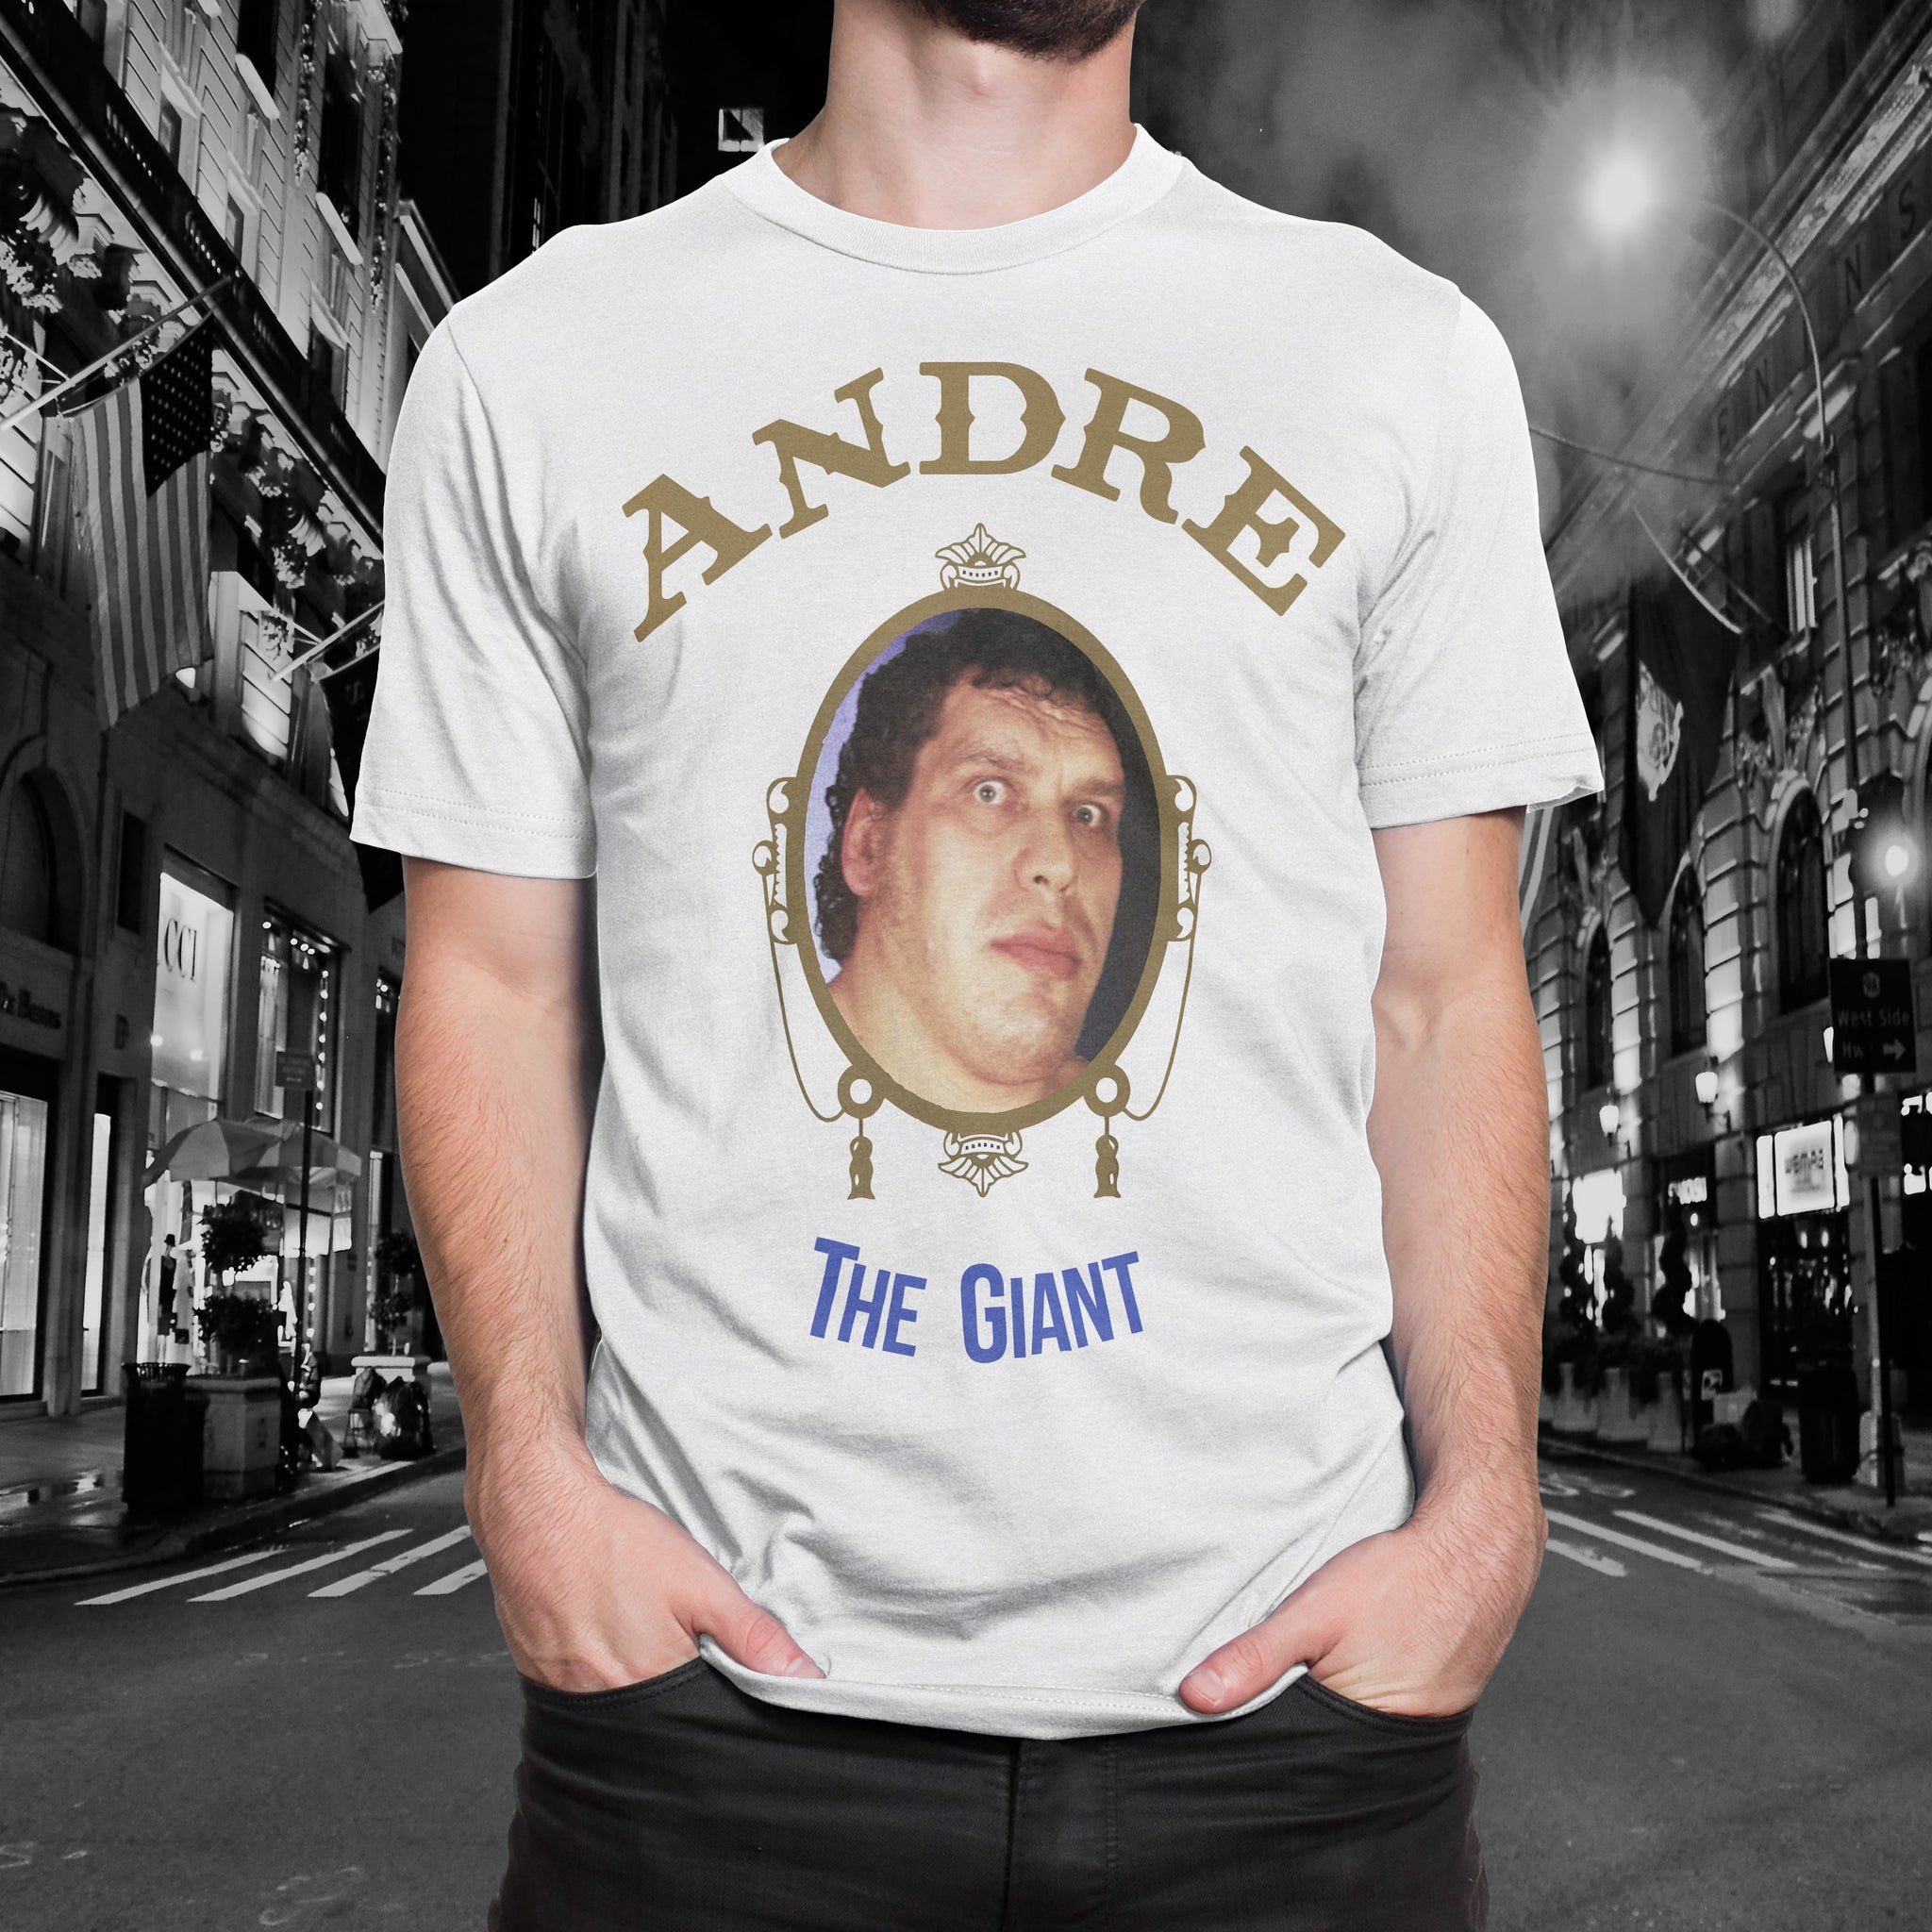 Andre "The Chronic" Tee